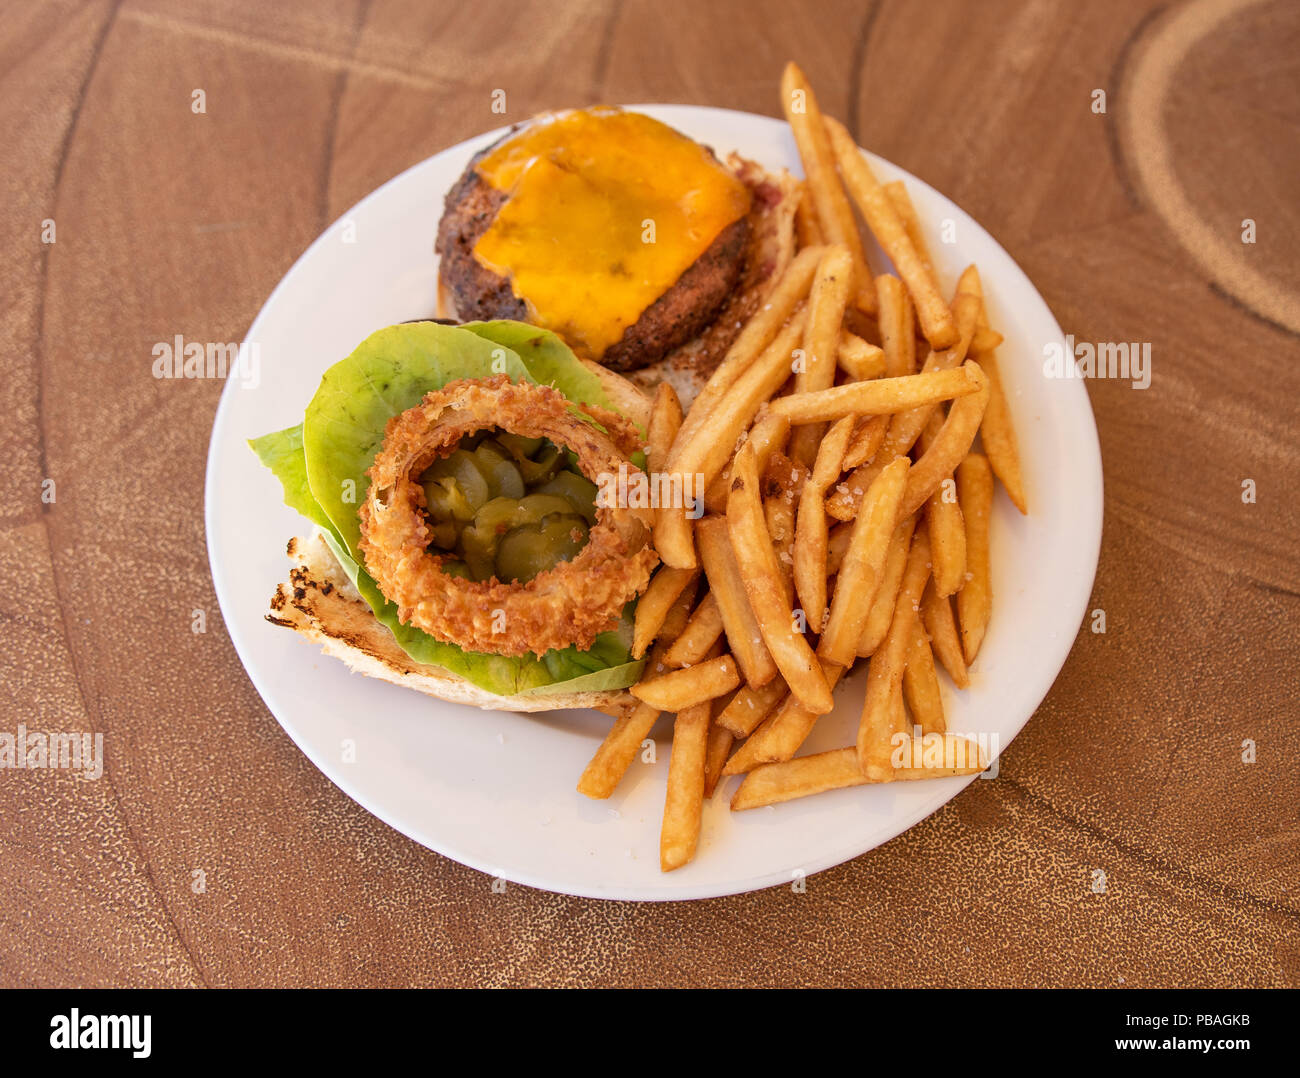 Cheeseburger With French Fries And Lettuce On White Plate Stock Photo